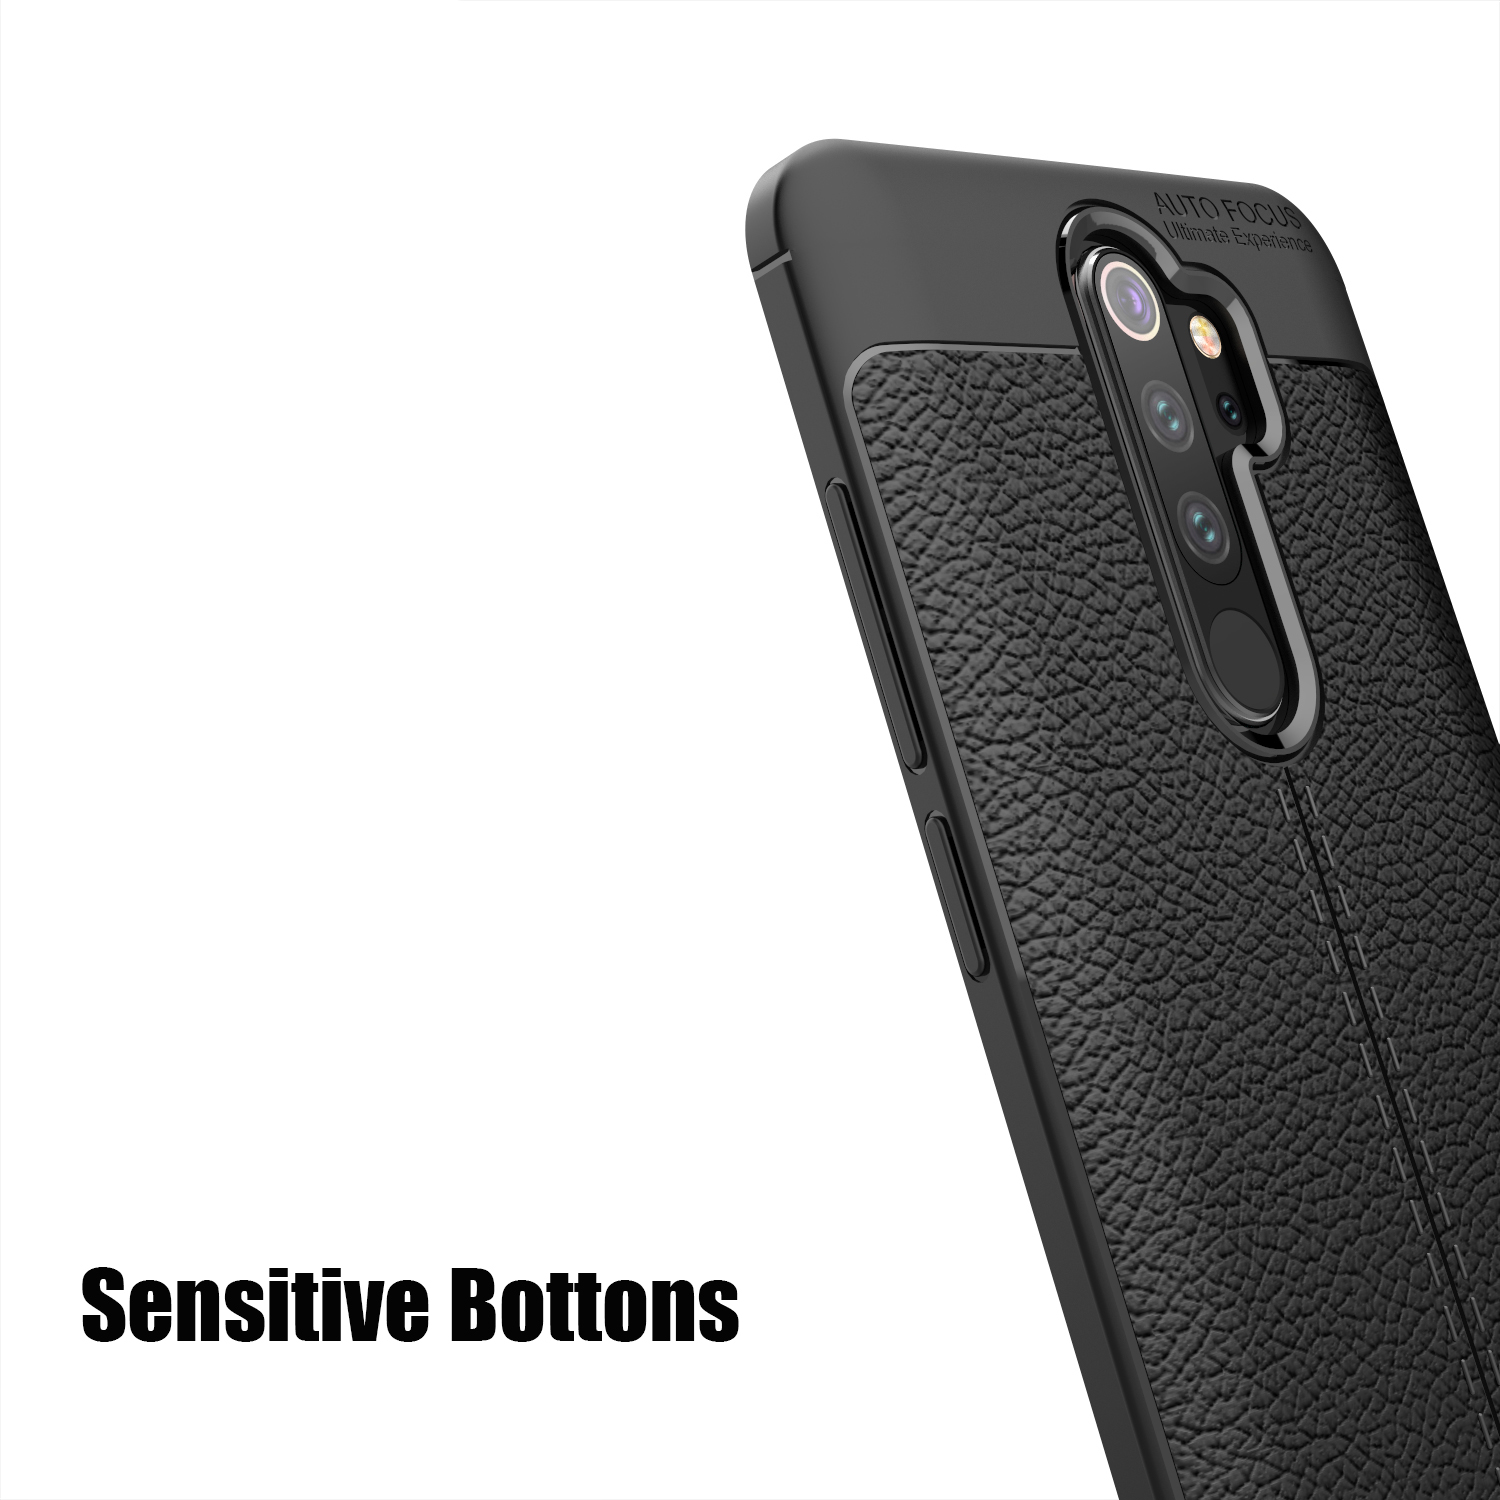 Bakeey-Xiaomi-Redmi-Note-8-Pro-Luxury-Litchi-Pattern-Shockproof-PU-Leather-Protective-Case-1588375-5